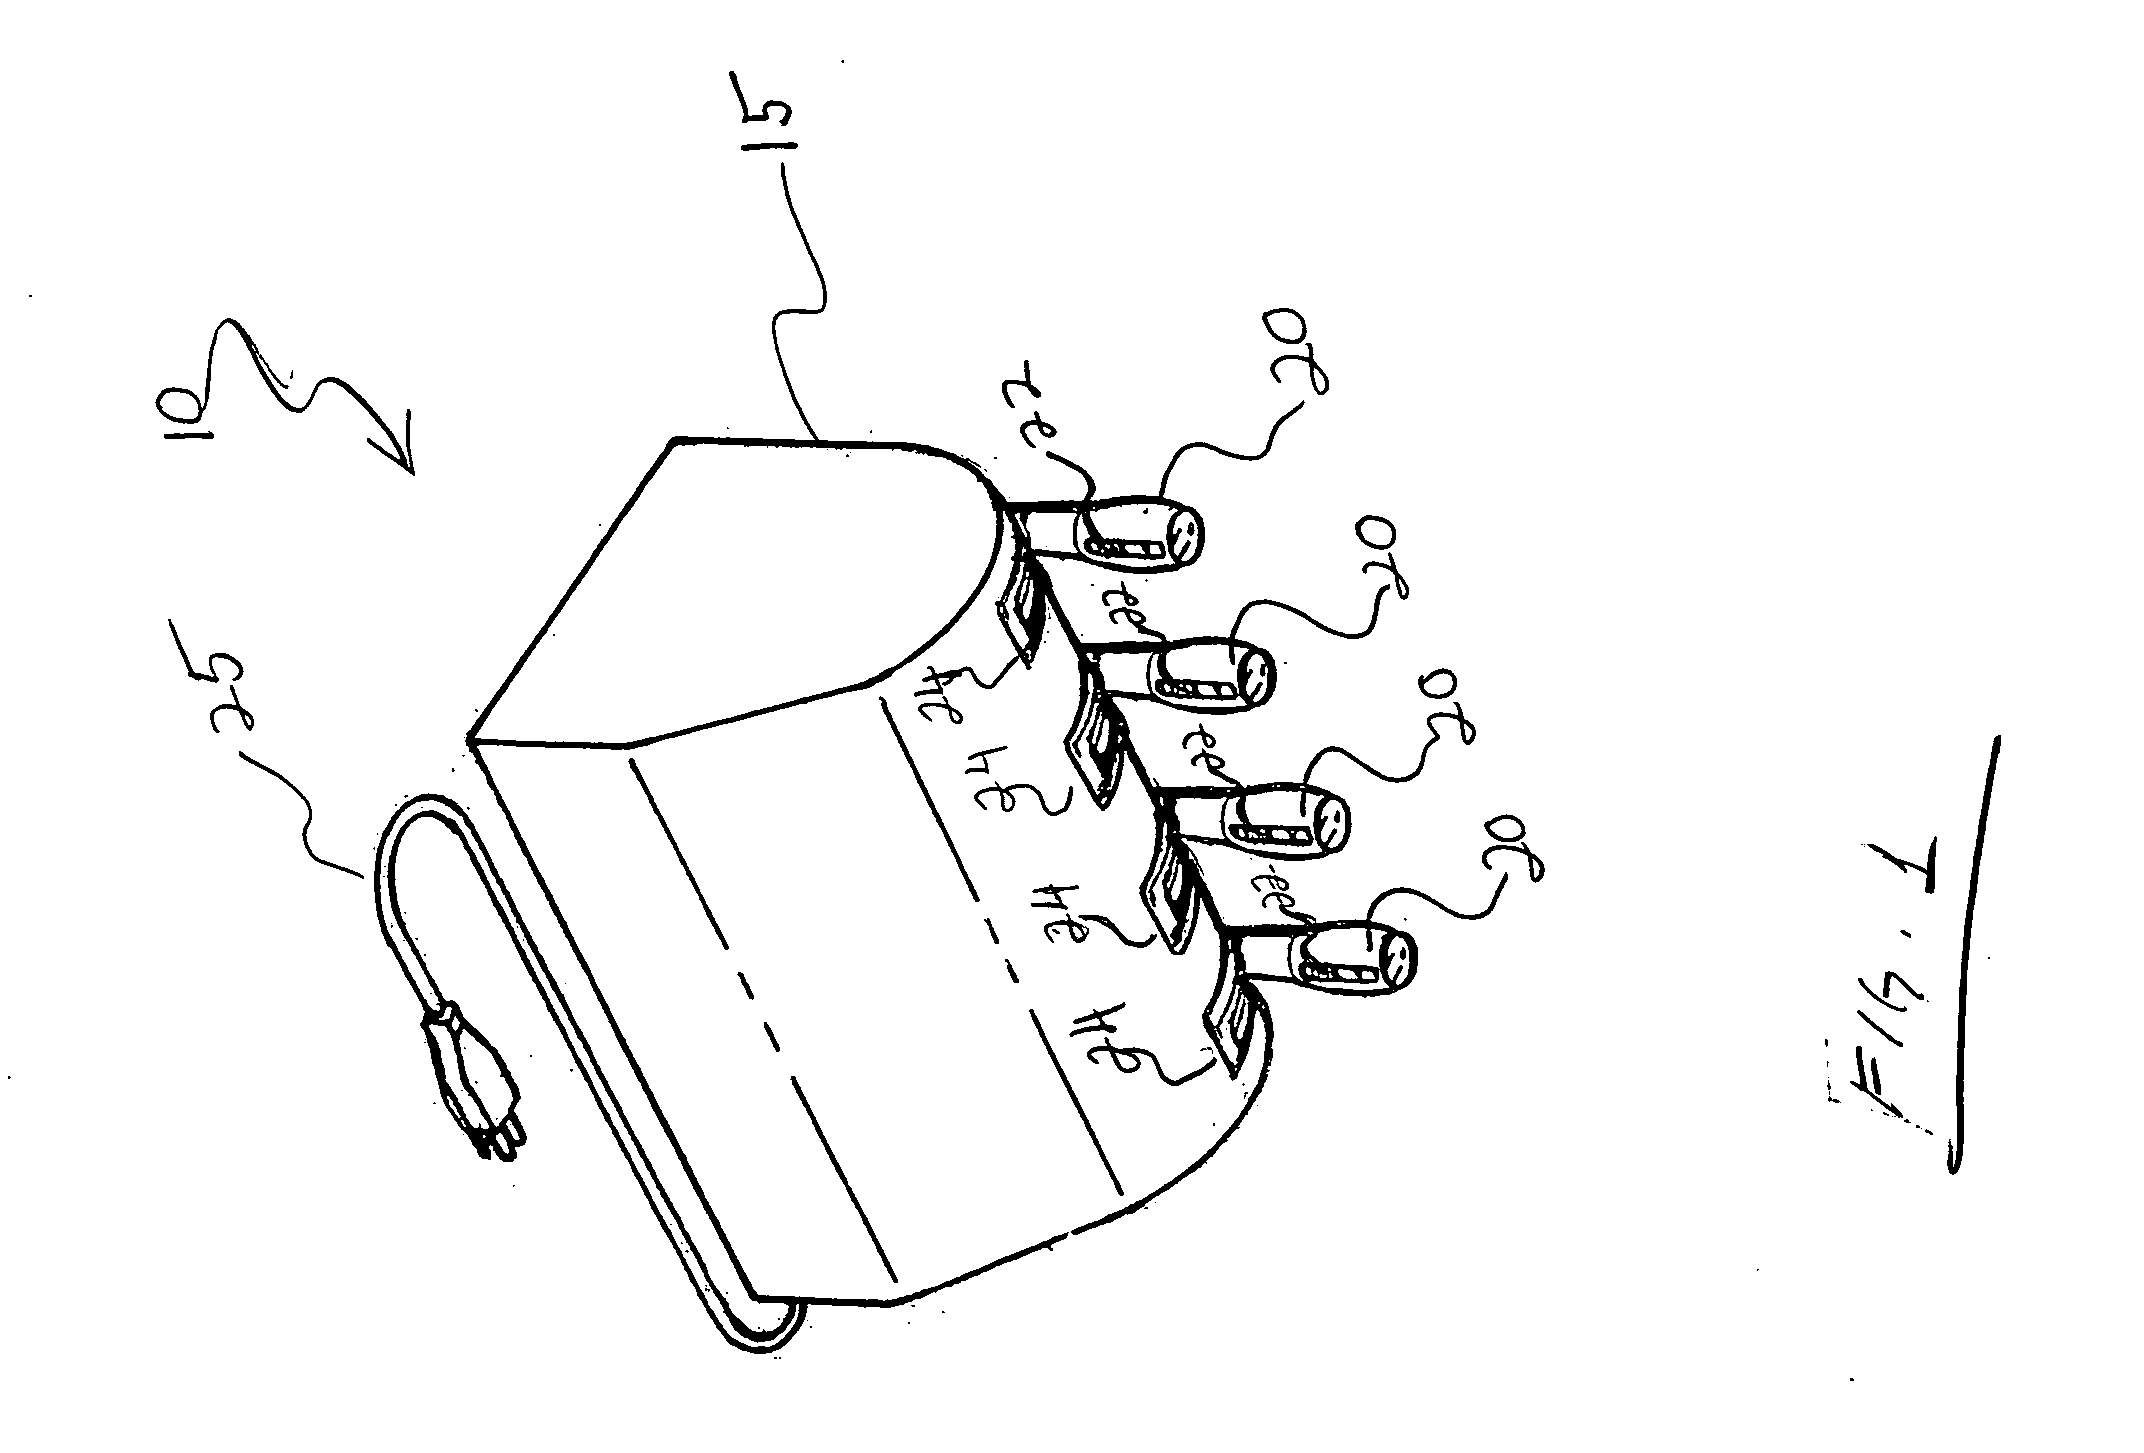 Overhead storage device for electrical tools and method of creating a work zone